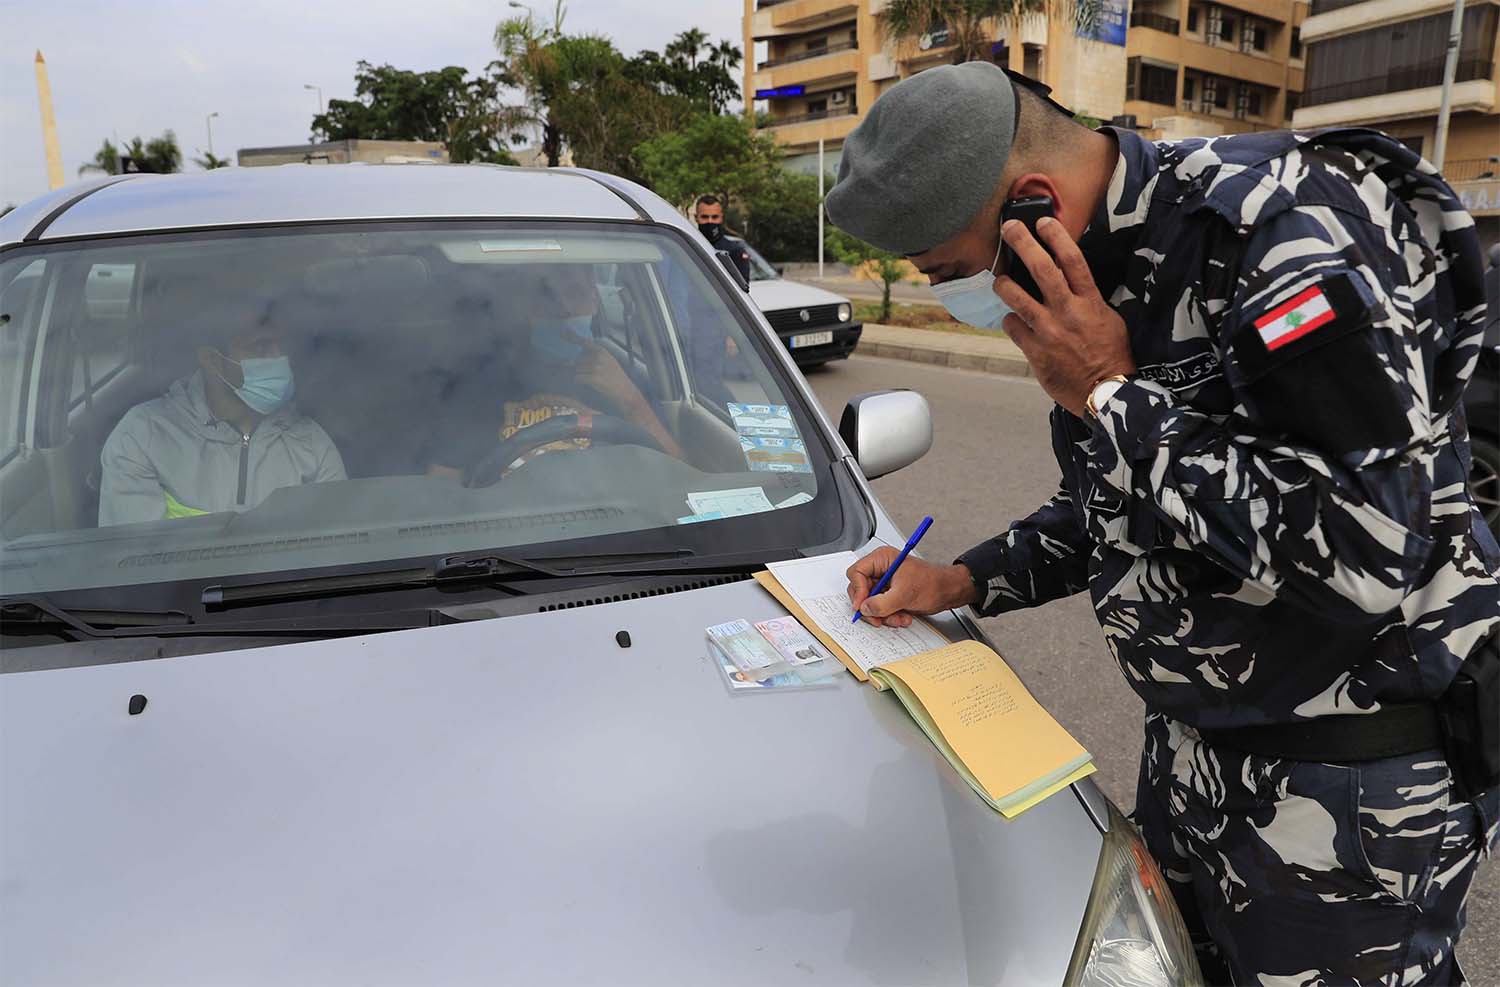 The lockdown comes after the number cases increased sharply in recent weeks around Lebanon